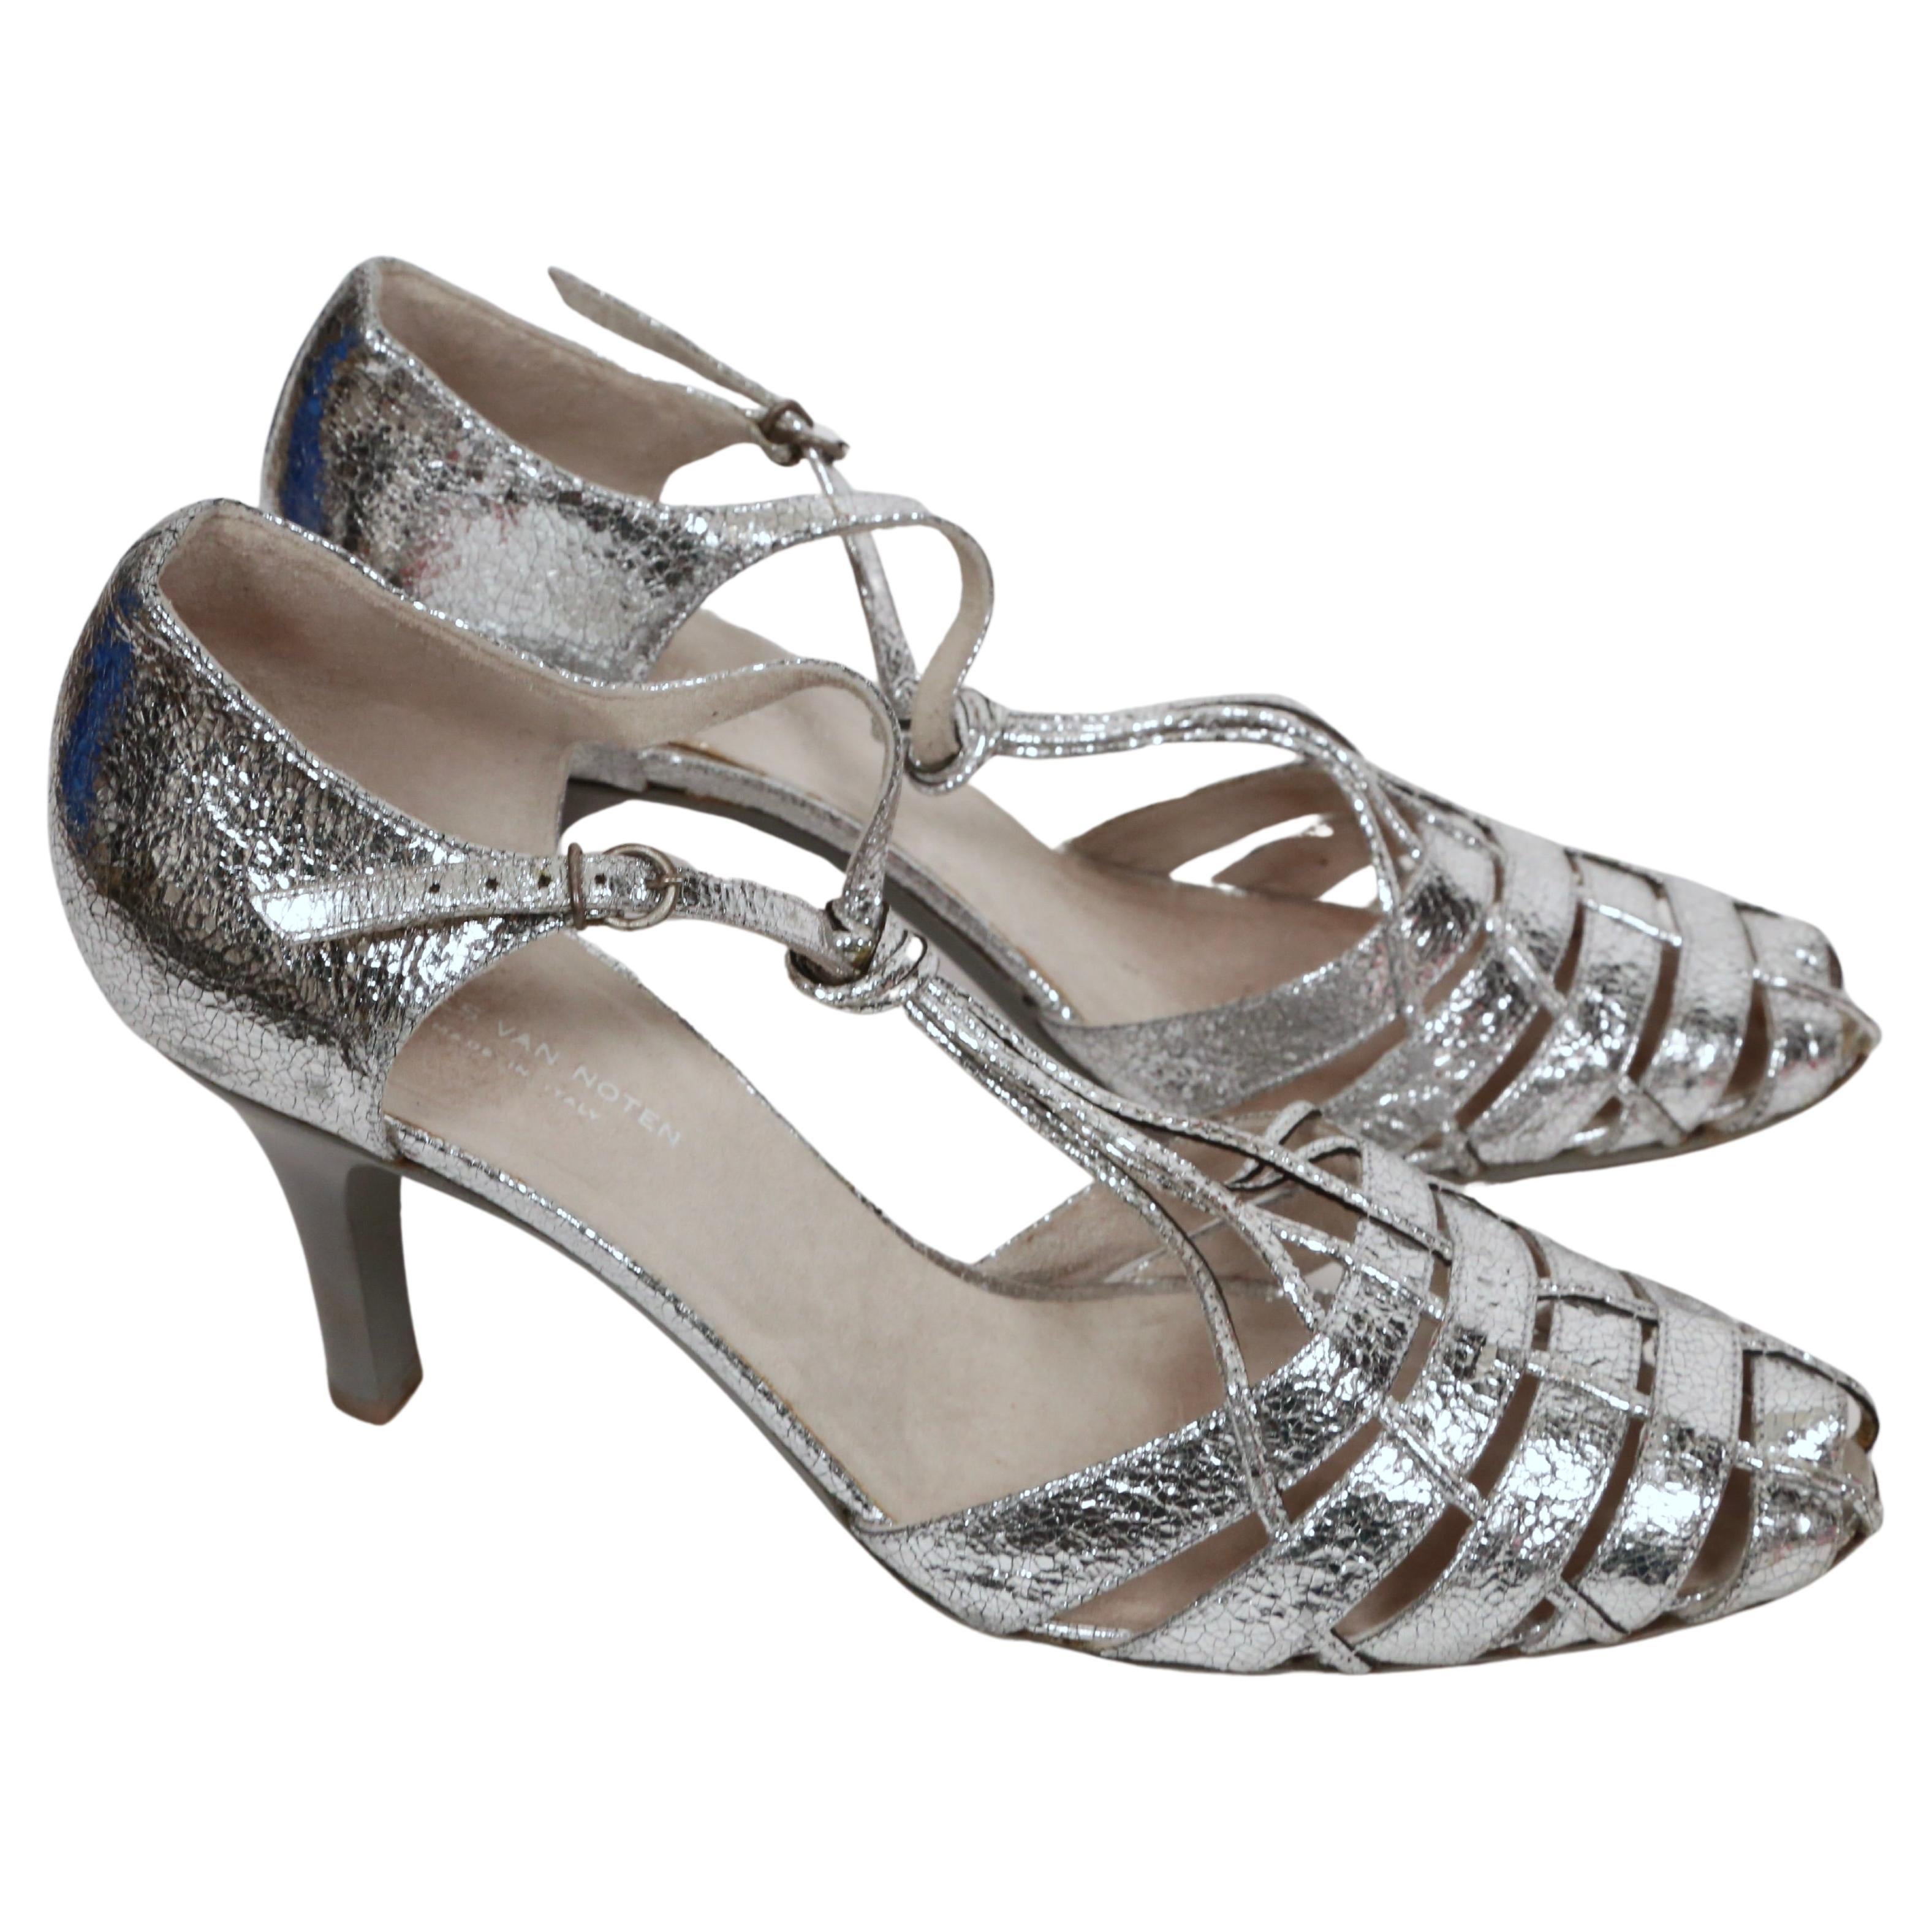 Very rare 'cracked' metallic silver leather heels designed by Dries Van Noten. Labeled a size size 39.5. Approximate measurements: (insole) 10.5